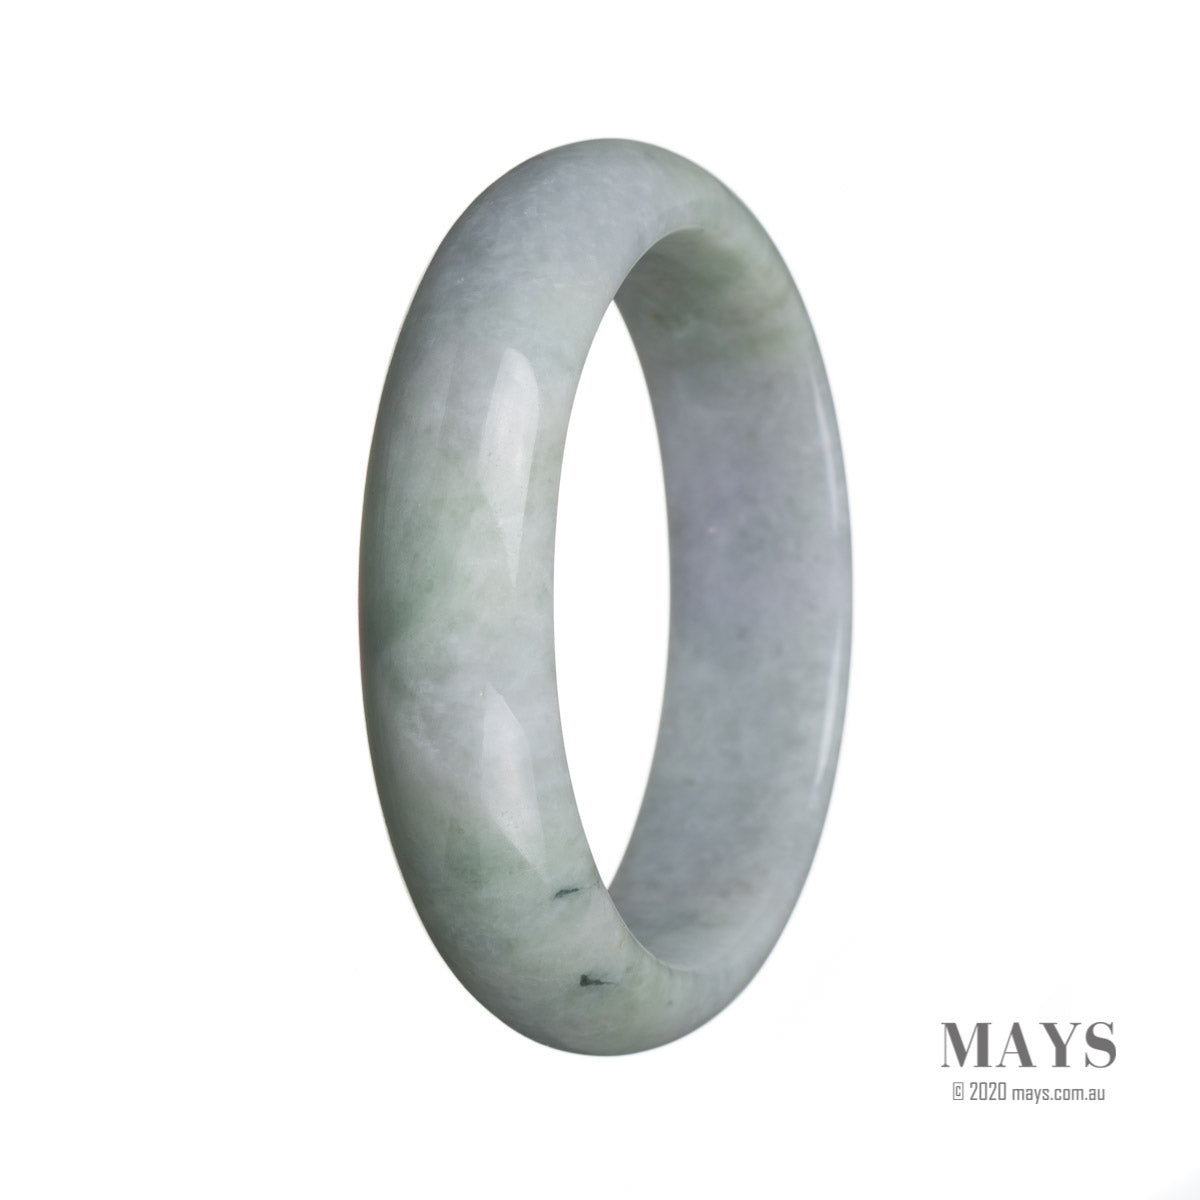 A light green jadeite bangle in a half-moon shape, crafted from genuine Grade A jade.